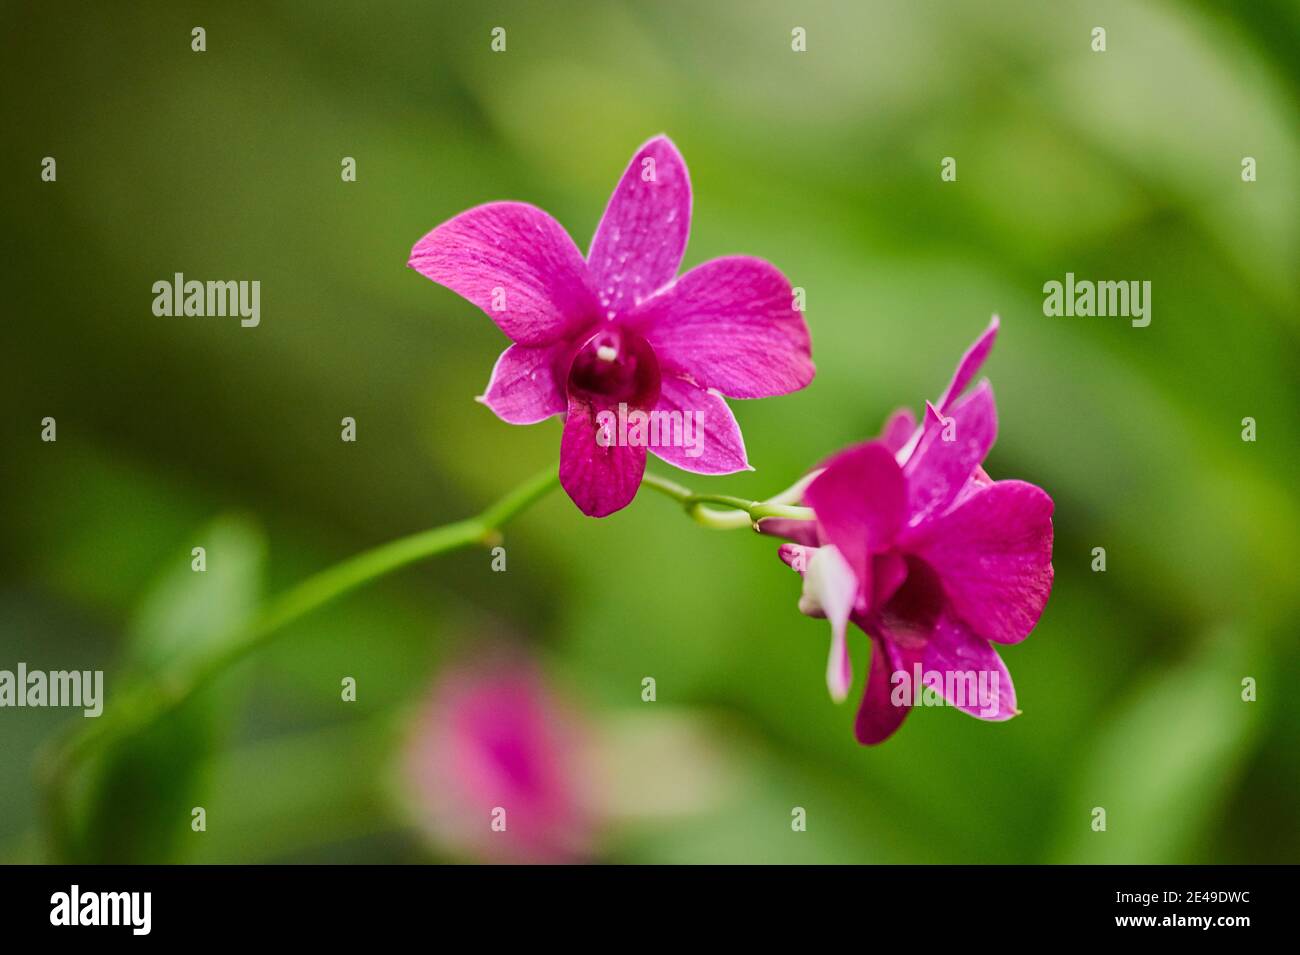 Medicinal plant dendrobium nobile, bloom, blooming, Germany Stock Photo